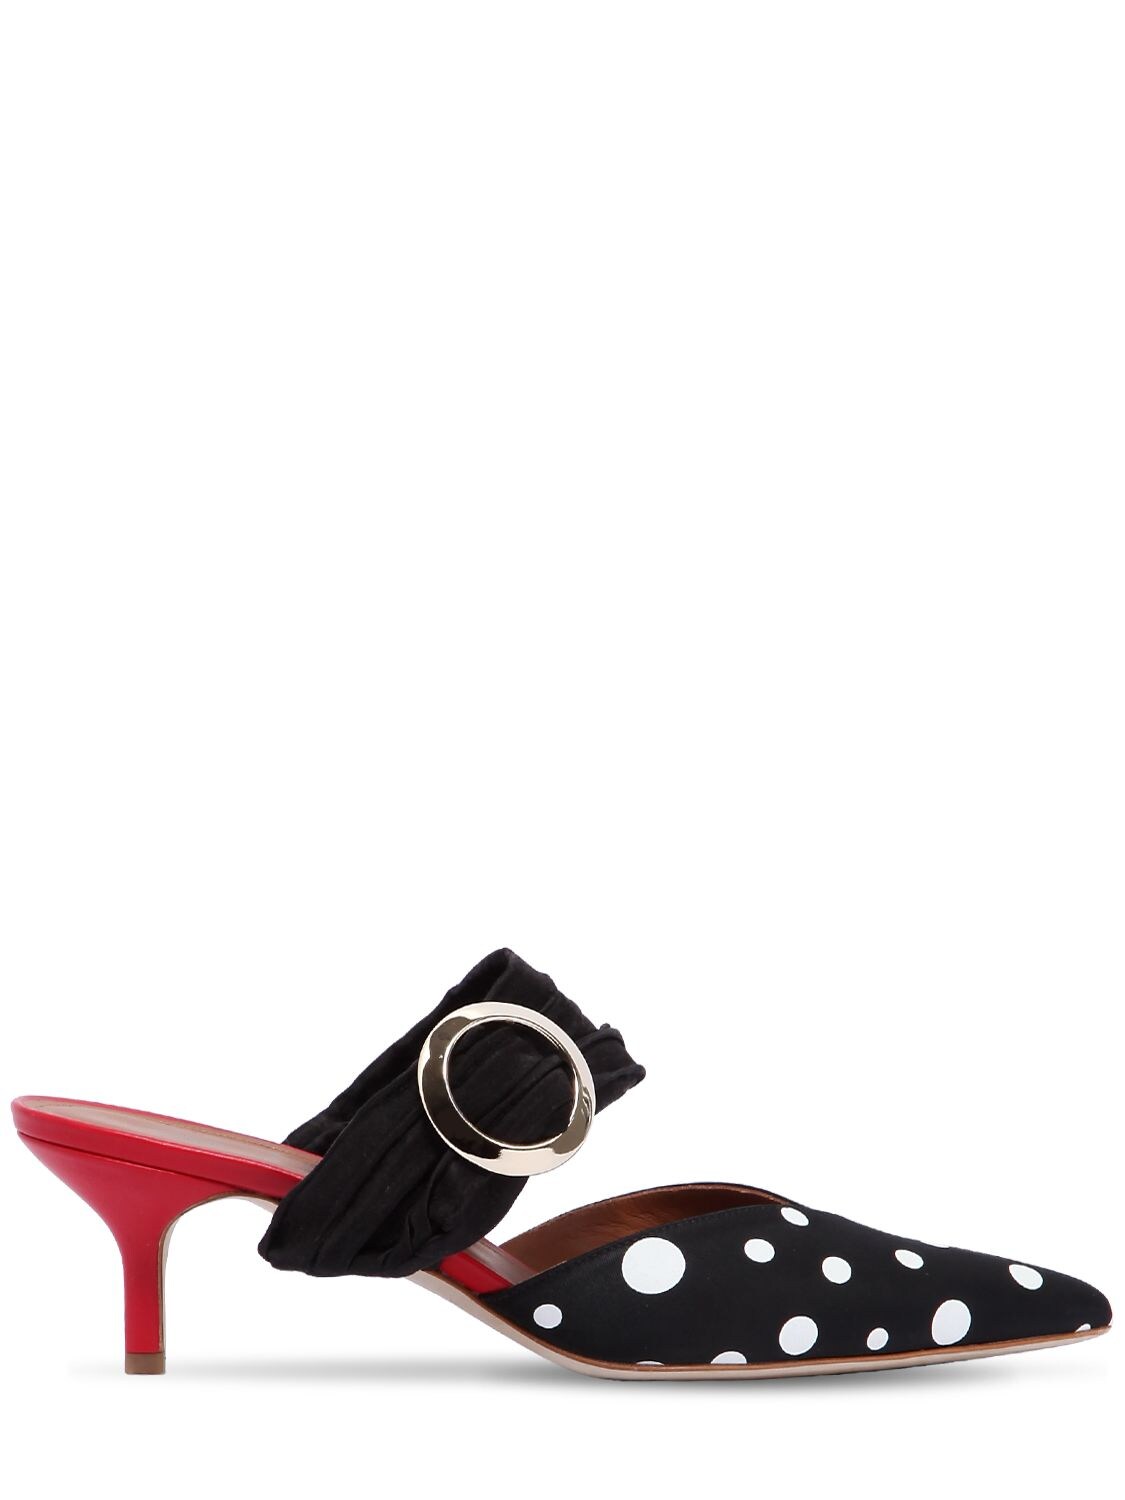 Emanuel Ungaro By Malone Souliers 45mm Maite Buckled Polka Dot Satin Mules In Black,white